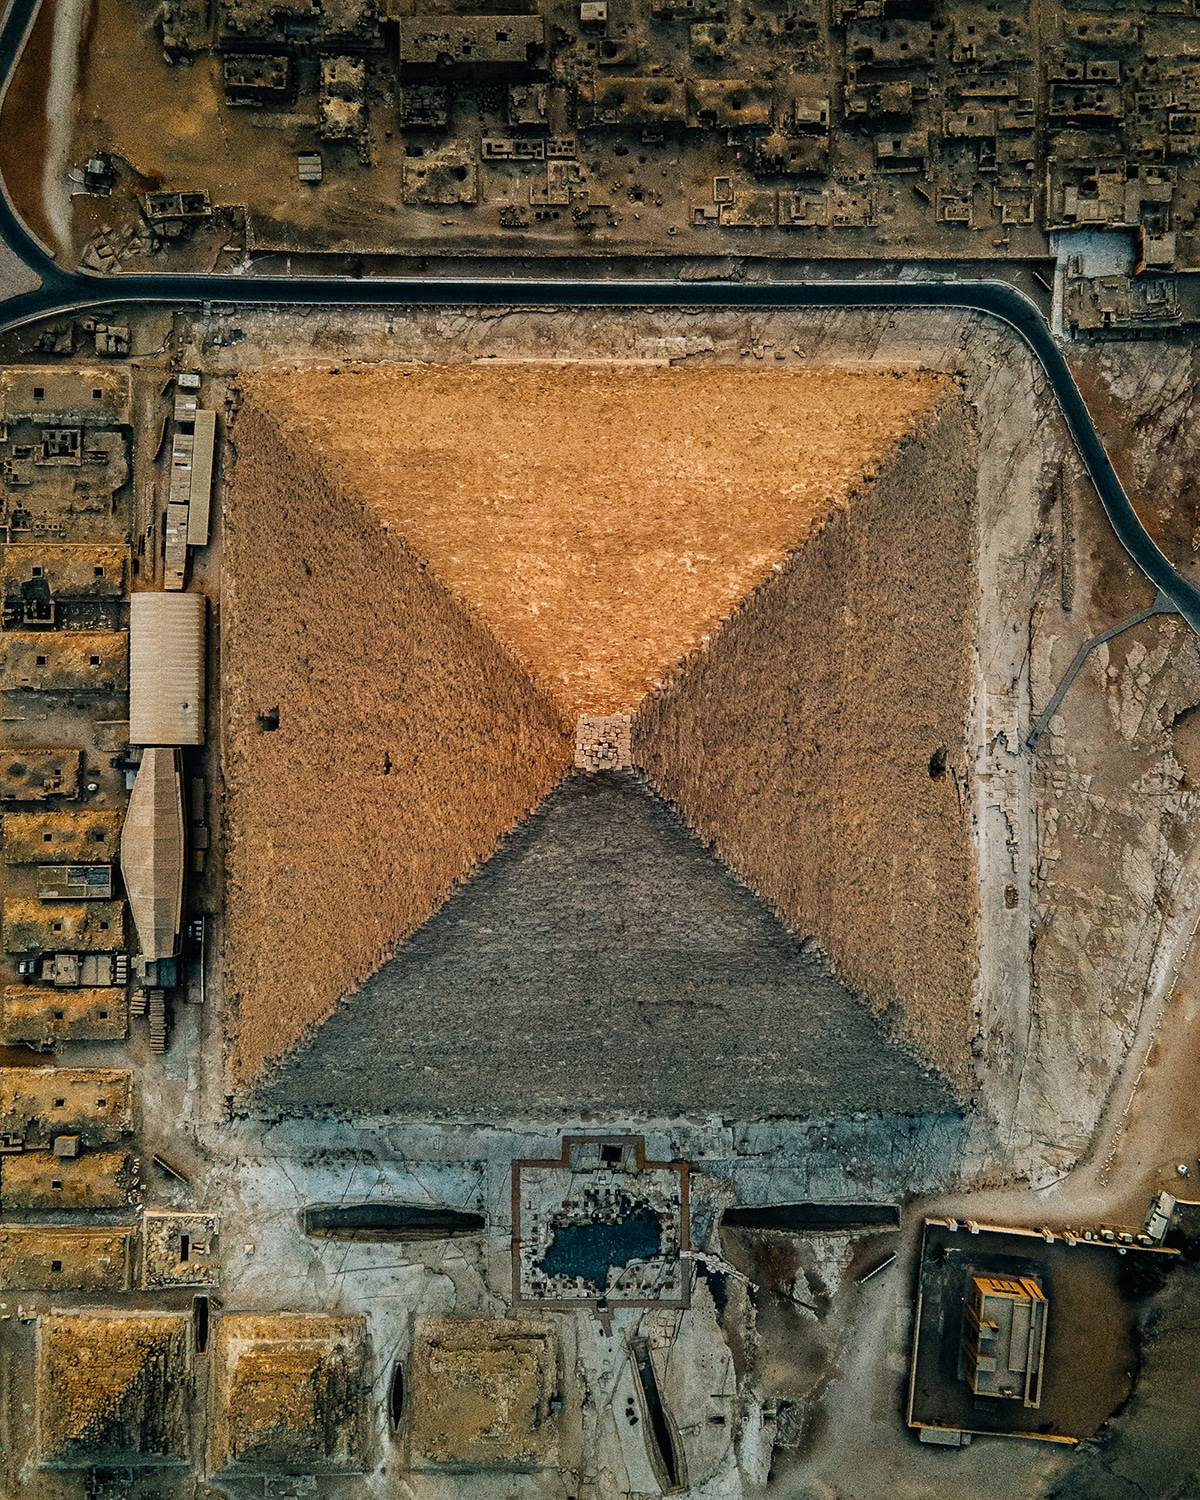 Alexander Ladanivskyy's Drone Images of Pyramids of Giza, Egypt